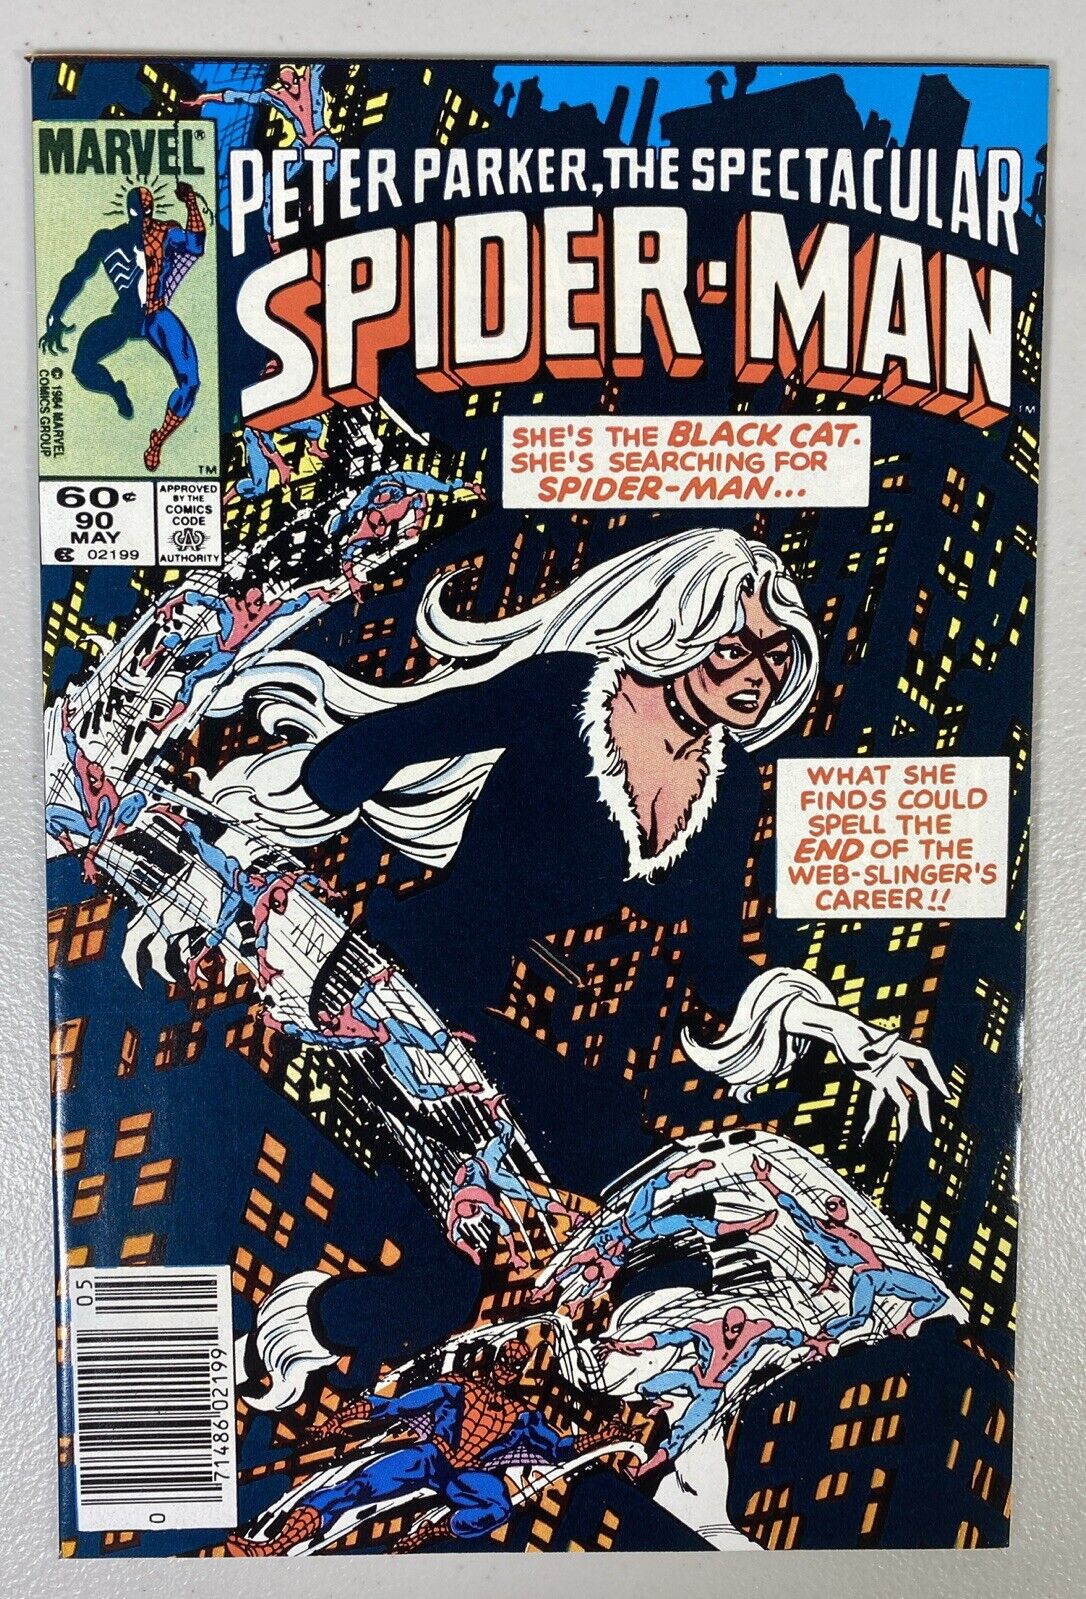 Peter Parker The Spectacular Spider-Man #90 VF+/NM- Newsstand Edition Black Suit